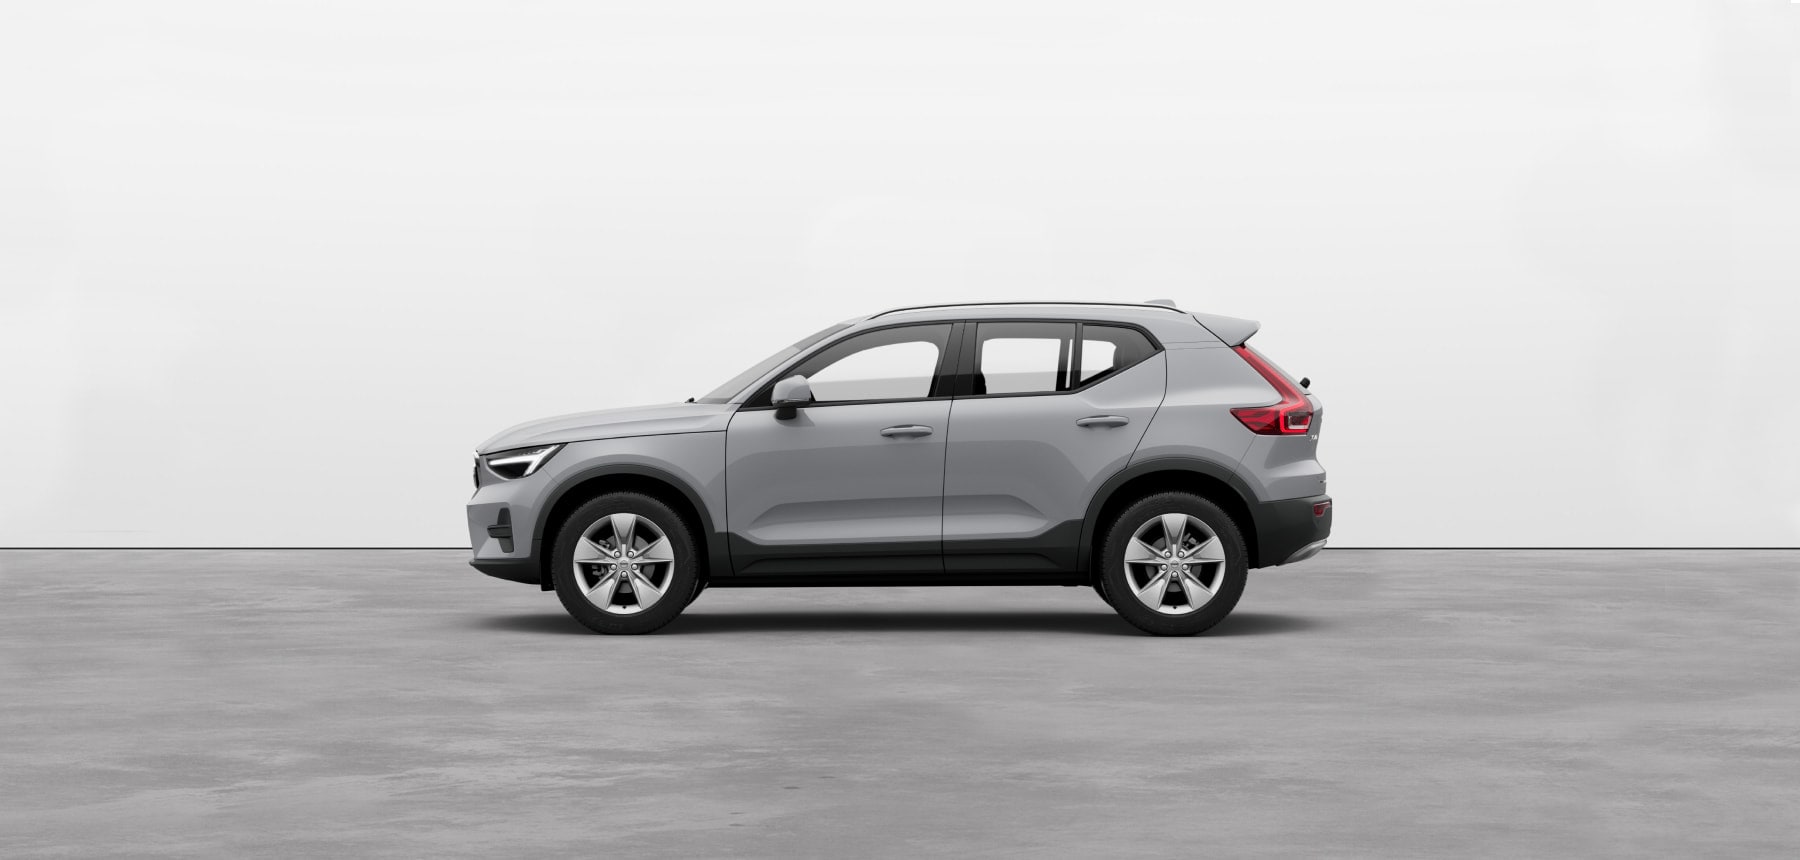 A vapour grey Volvo XC40 compact SUV standing still on grey floor in a studio